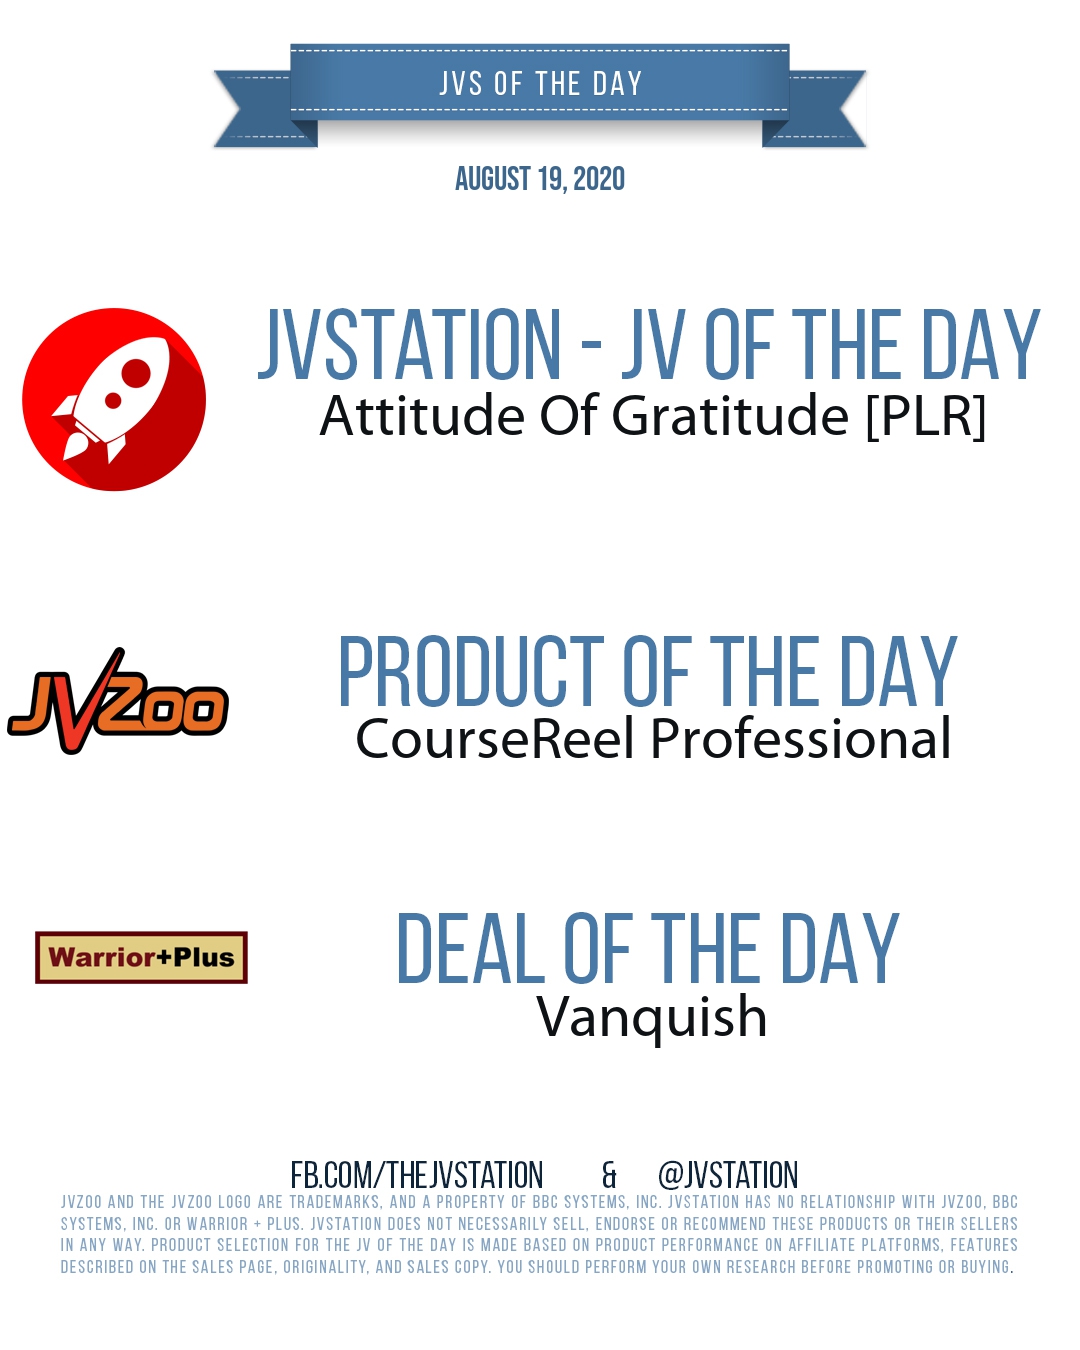 JVs of the day - August 19, 2020